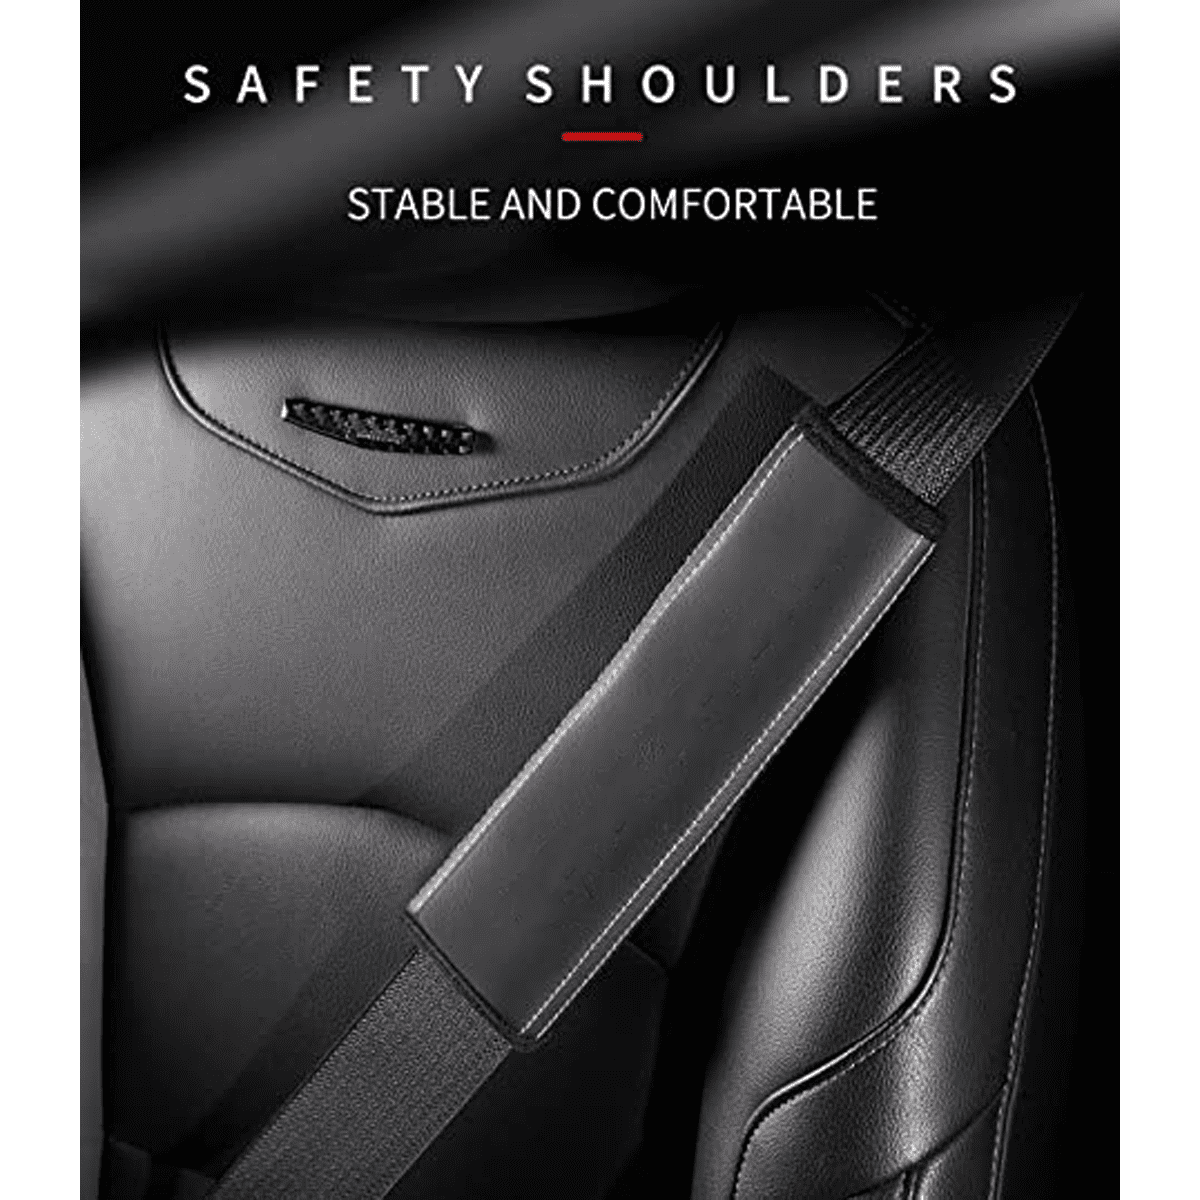 Custom Text and Logo Seat Belt Covers, Fit with all car, Microfiber Leather Seat Belt Shoulder Pads for More Comfortable Driving, Set of 2pcs